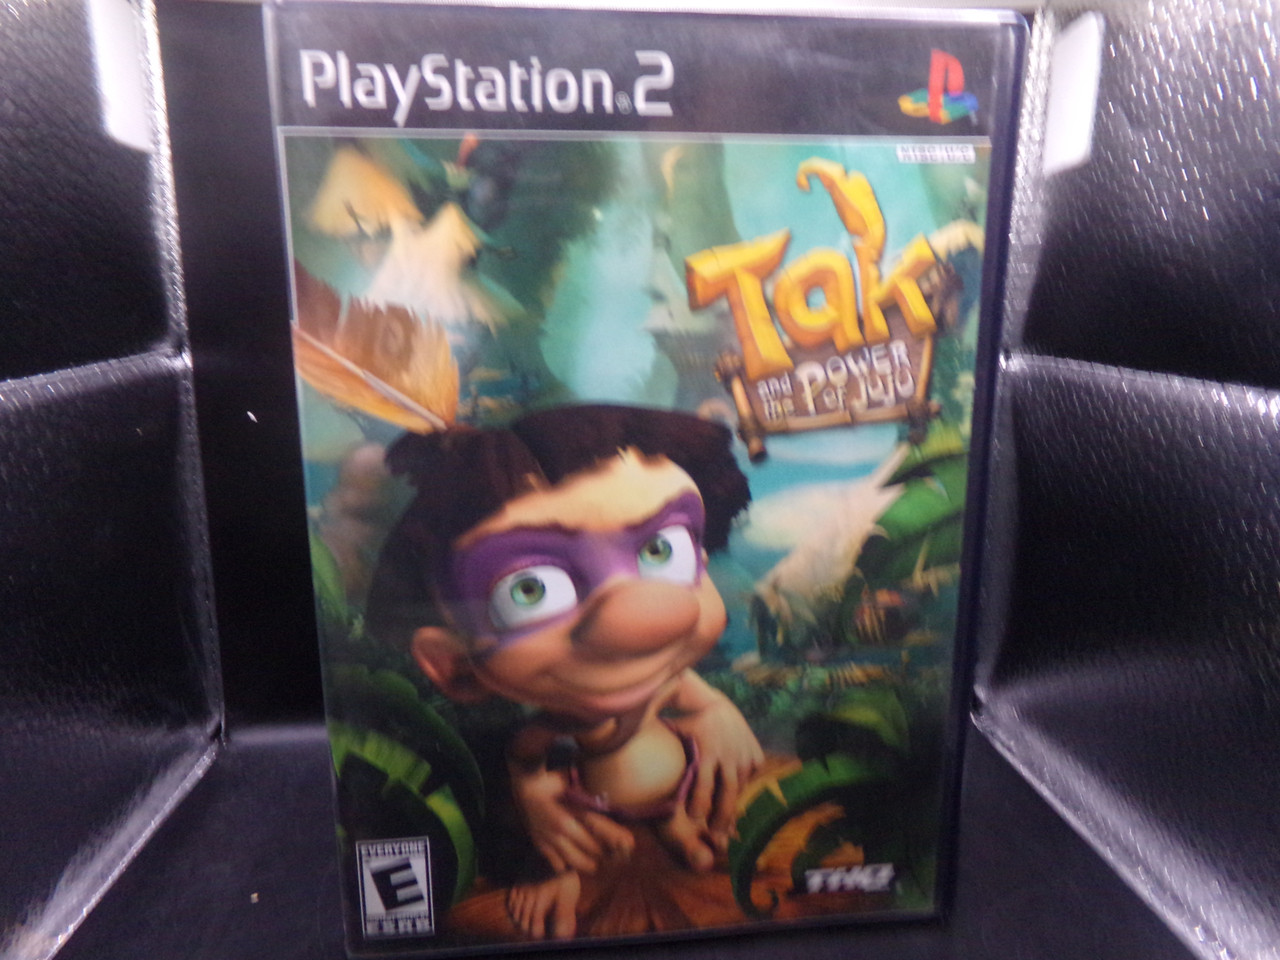 Tak and the Power of JuJu - PlayStation 2